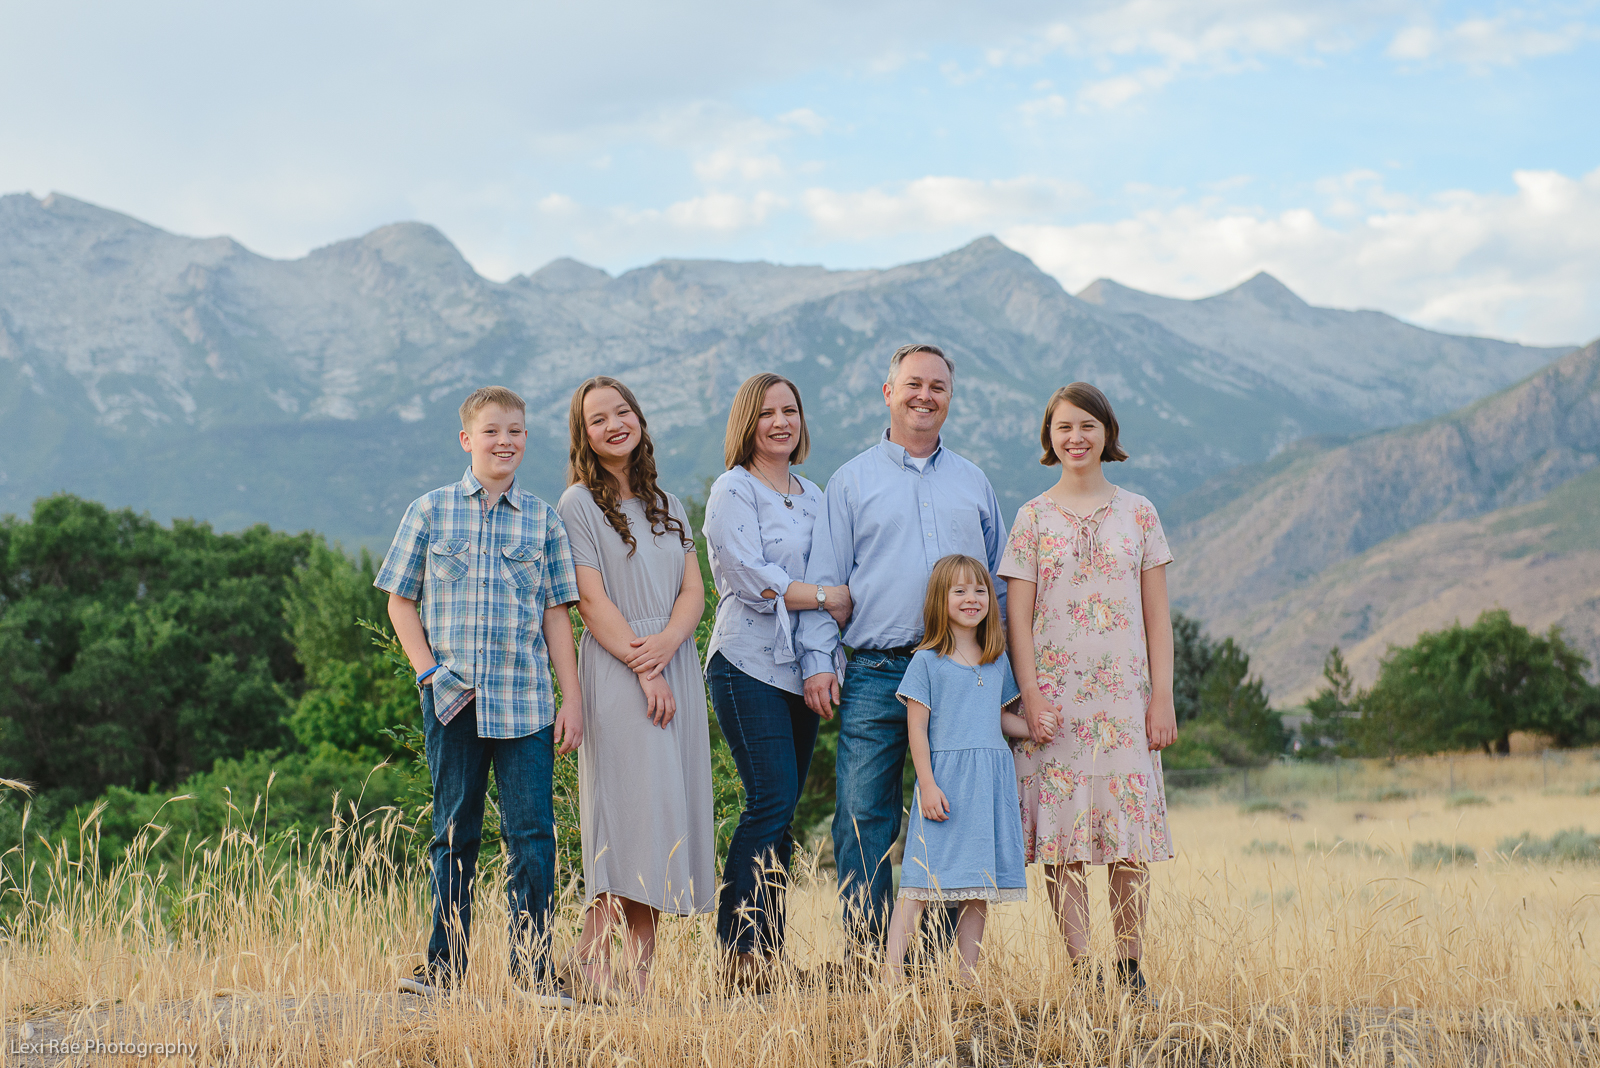 What to expect from your extended family photographer session